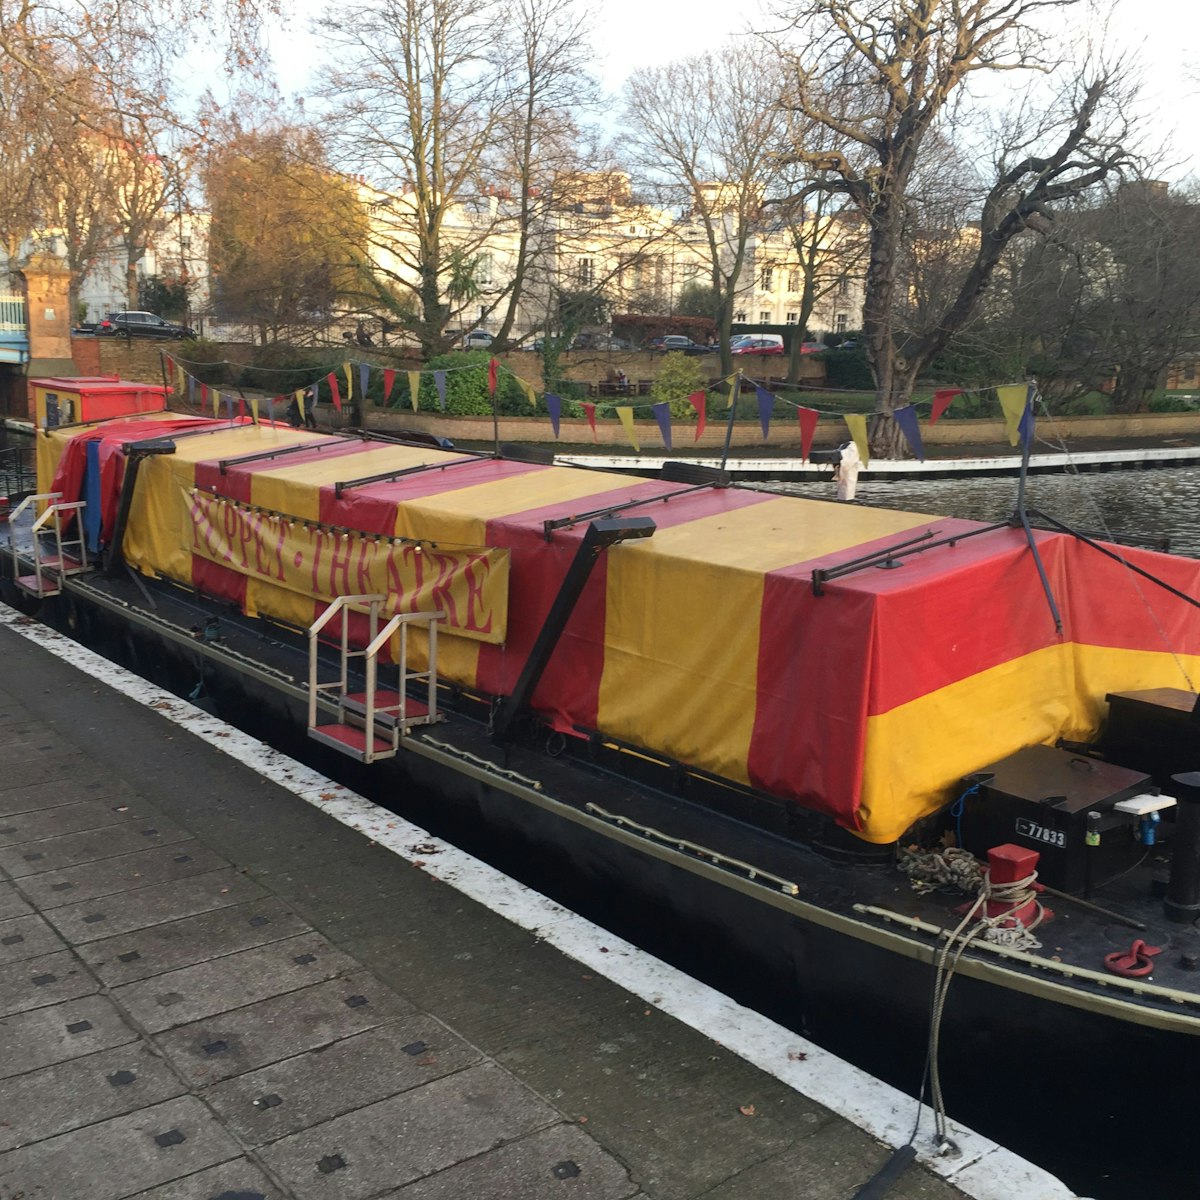 The Puppet Theatre Barge, which is permanently moored in Little Venice